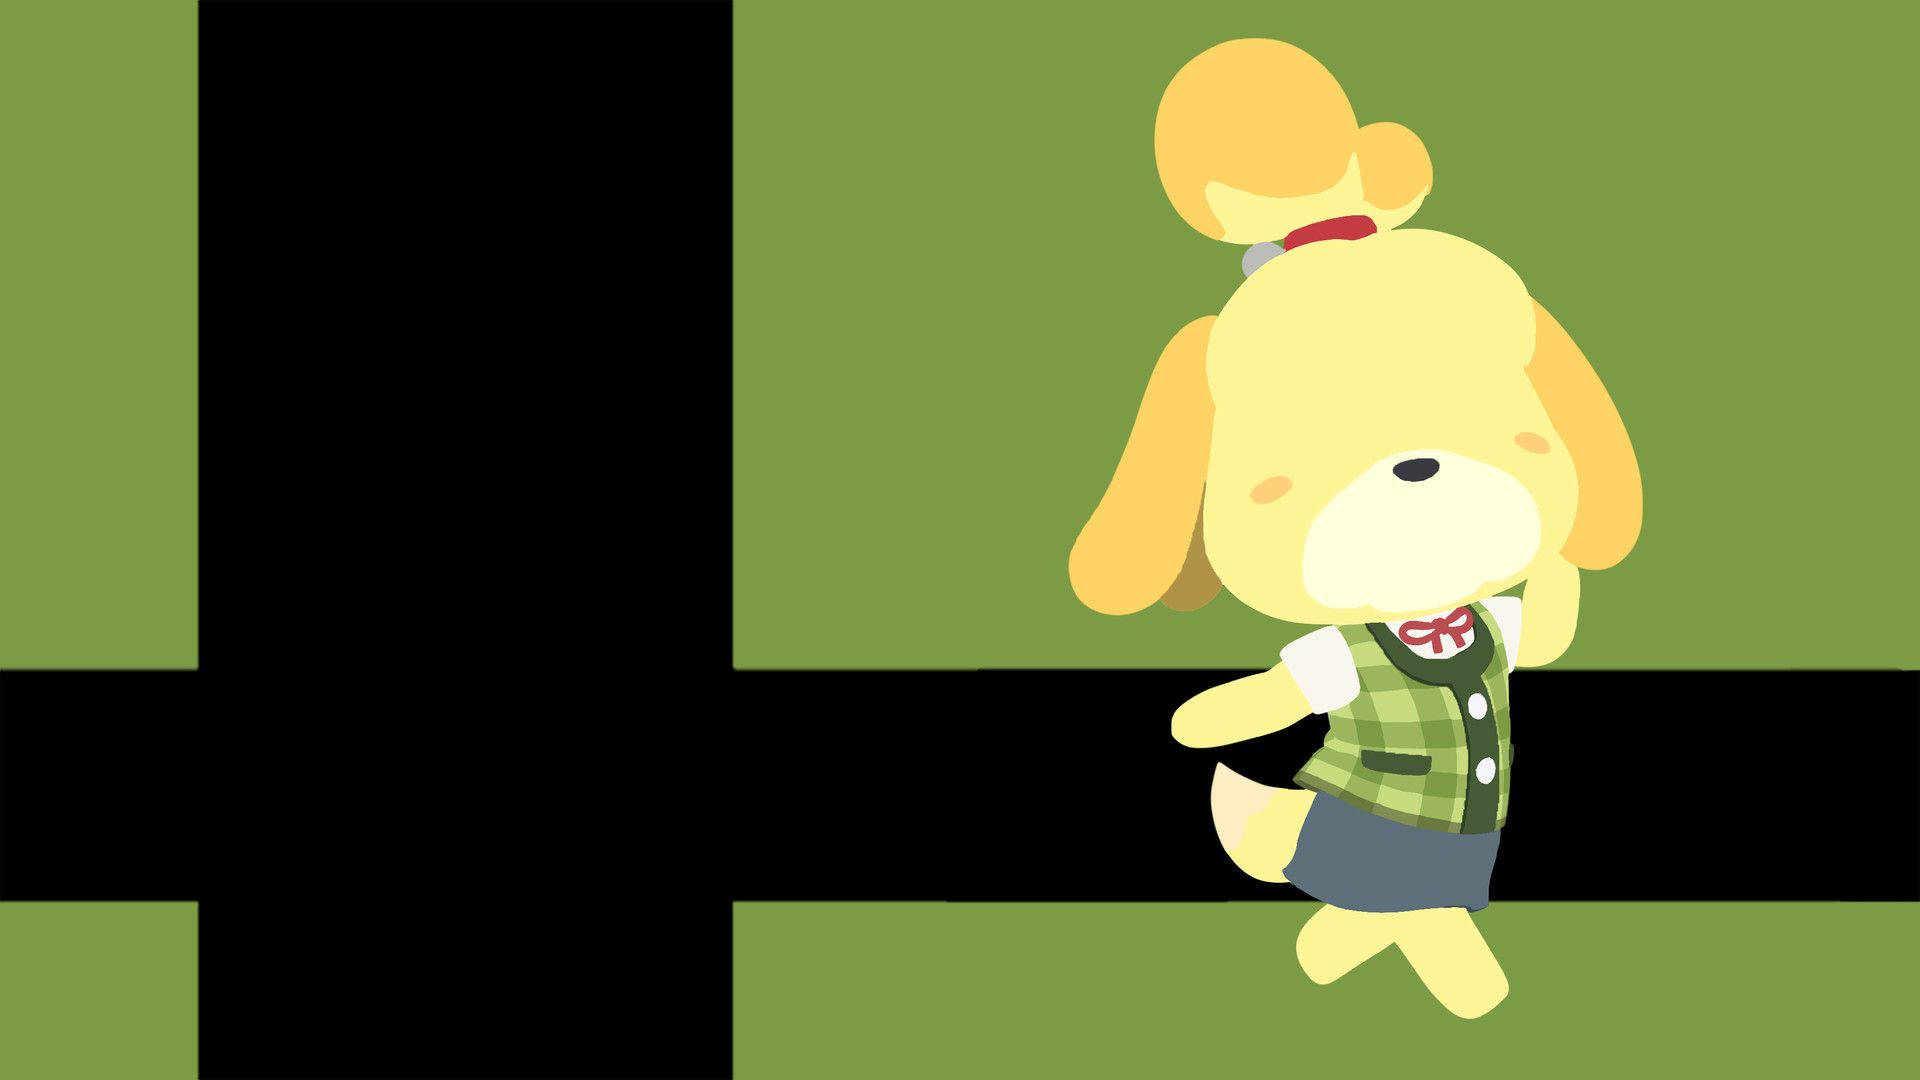 Join the fun with Isabelle in Super Smash Bros Ultimate! Wallpaper